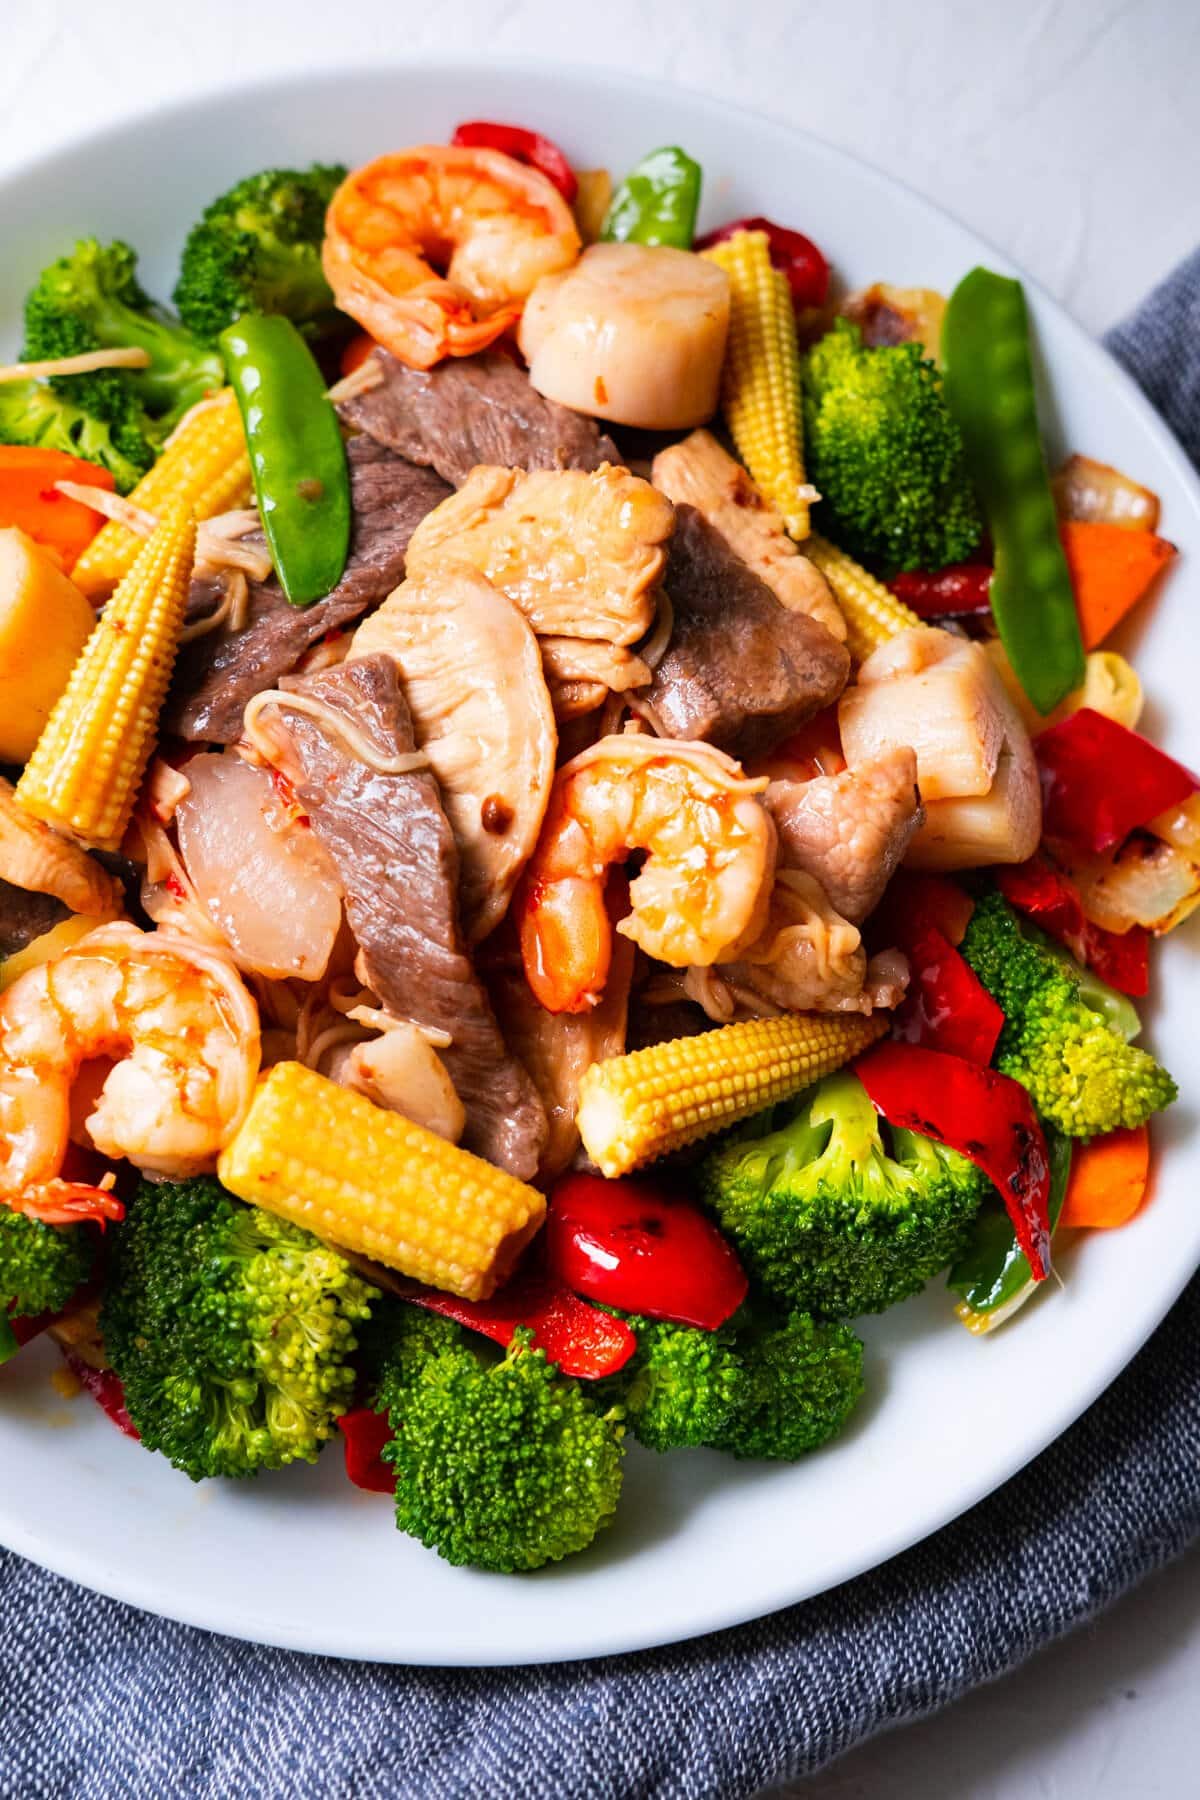 Easy and delicious homemade takeout style happy family stir fry served in a plate.